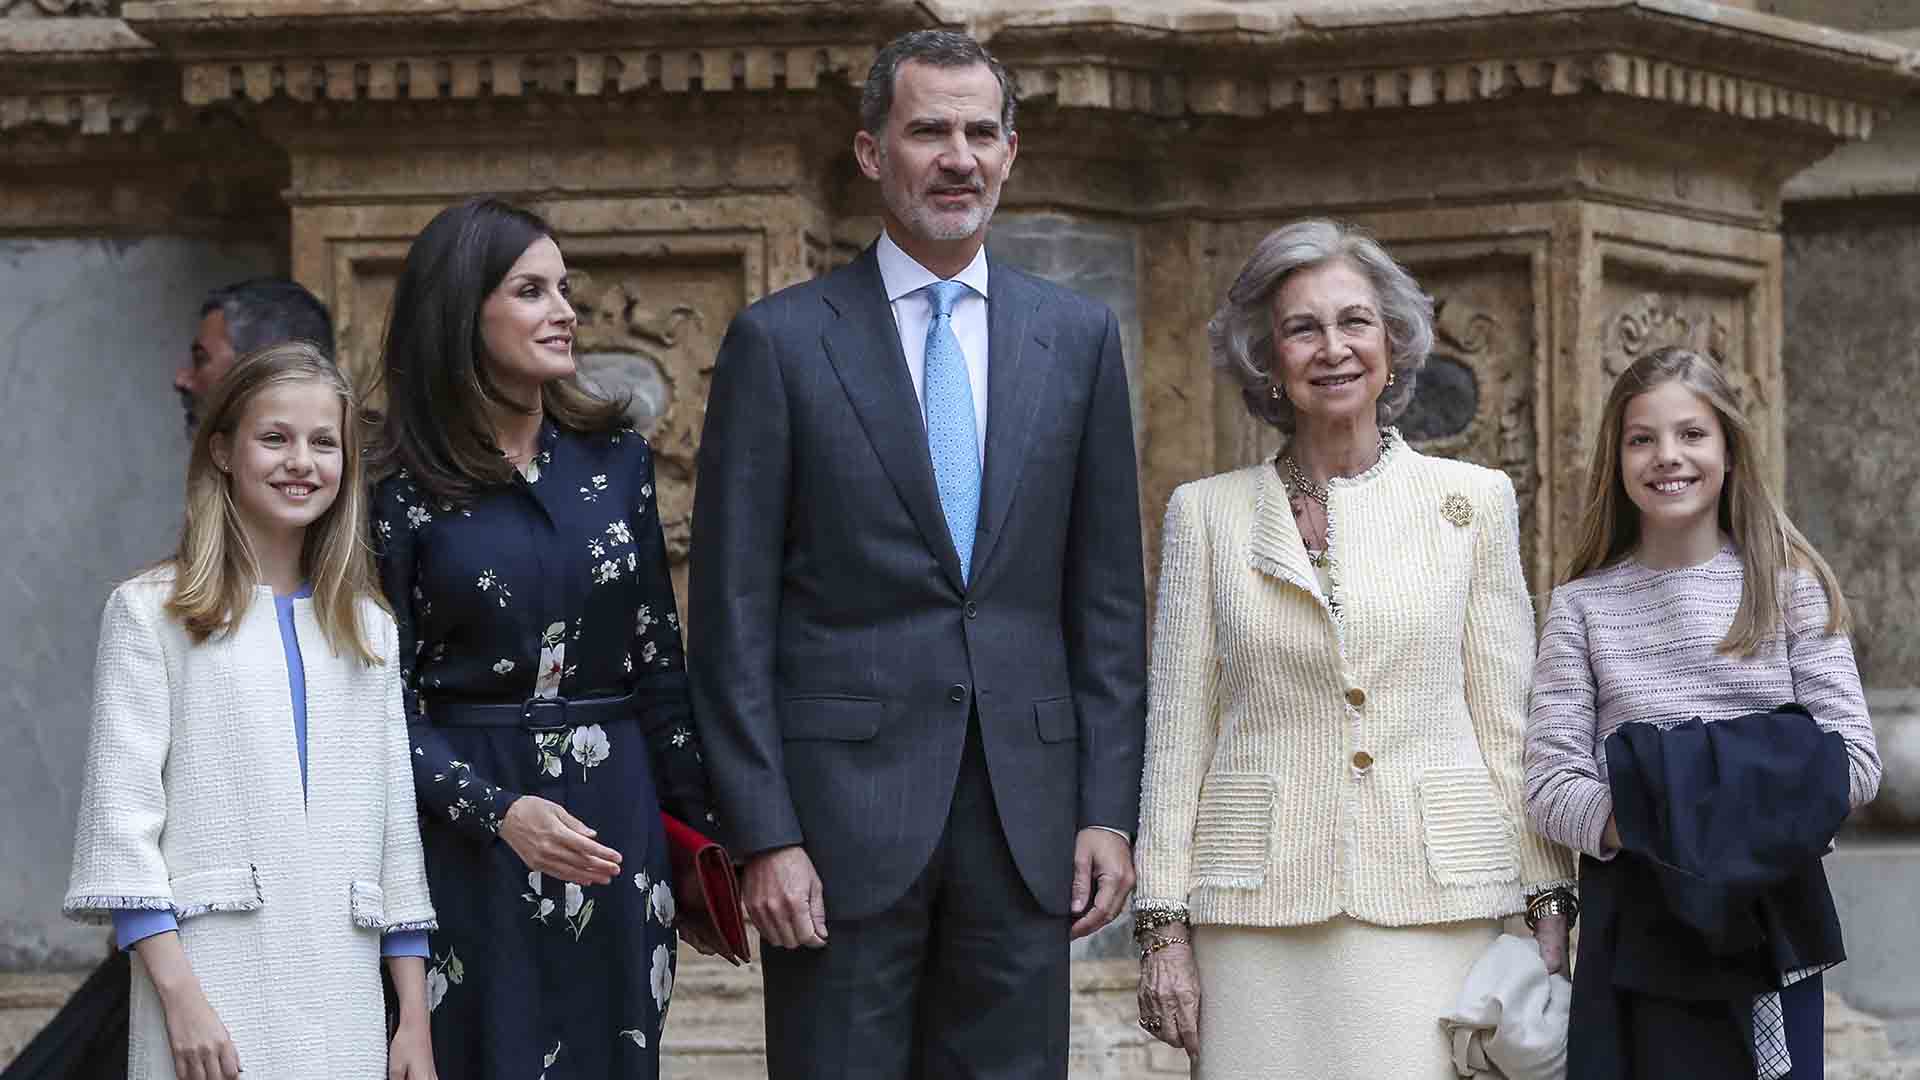 Spanish King Felipe VI and Queen Letizia with daughters Princess Leonor and  Princess Sofia next to Queen Sofia during Easter Sunday Mass in Palma, on Sunday 21 April 2019.